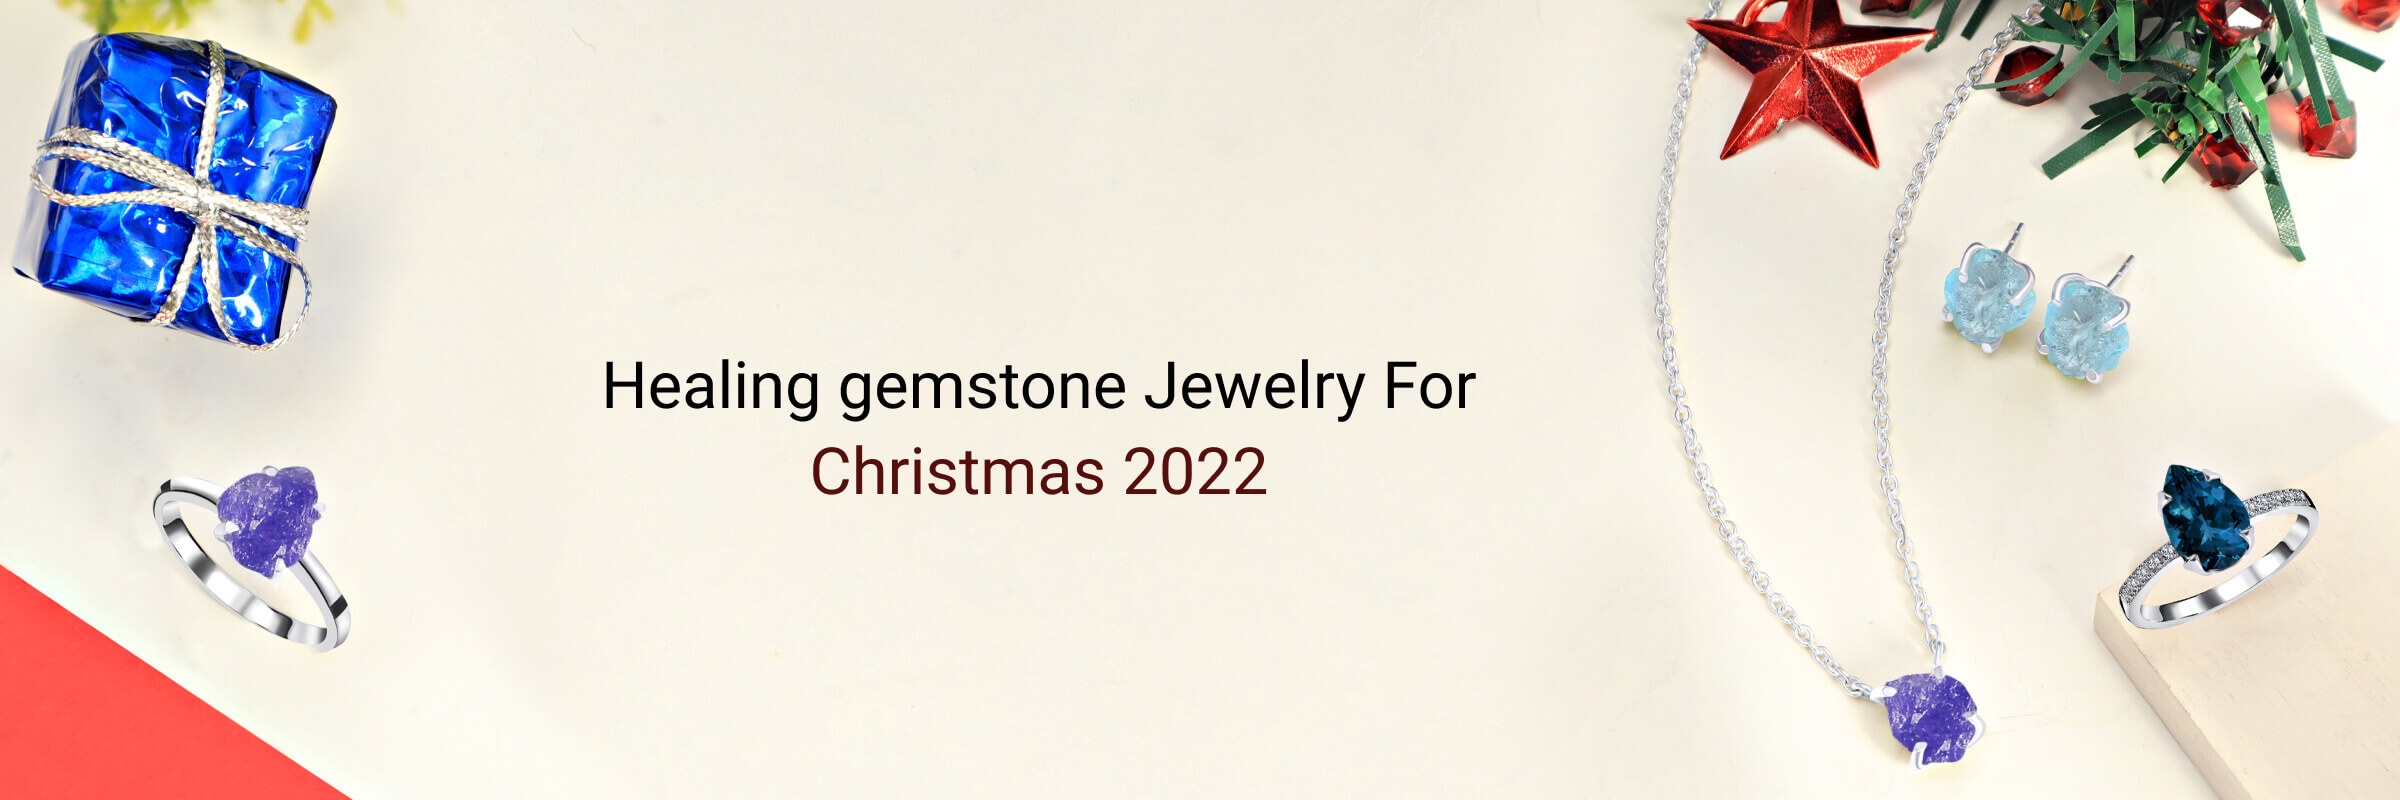 healing gemstone Jewelry for this Christmas